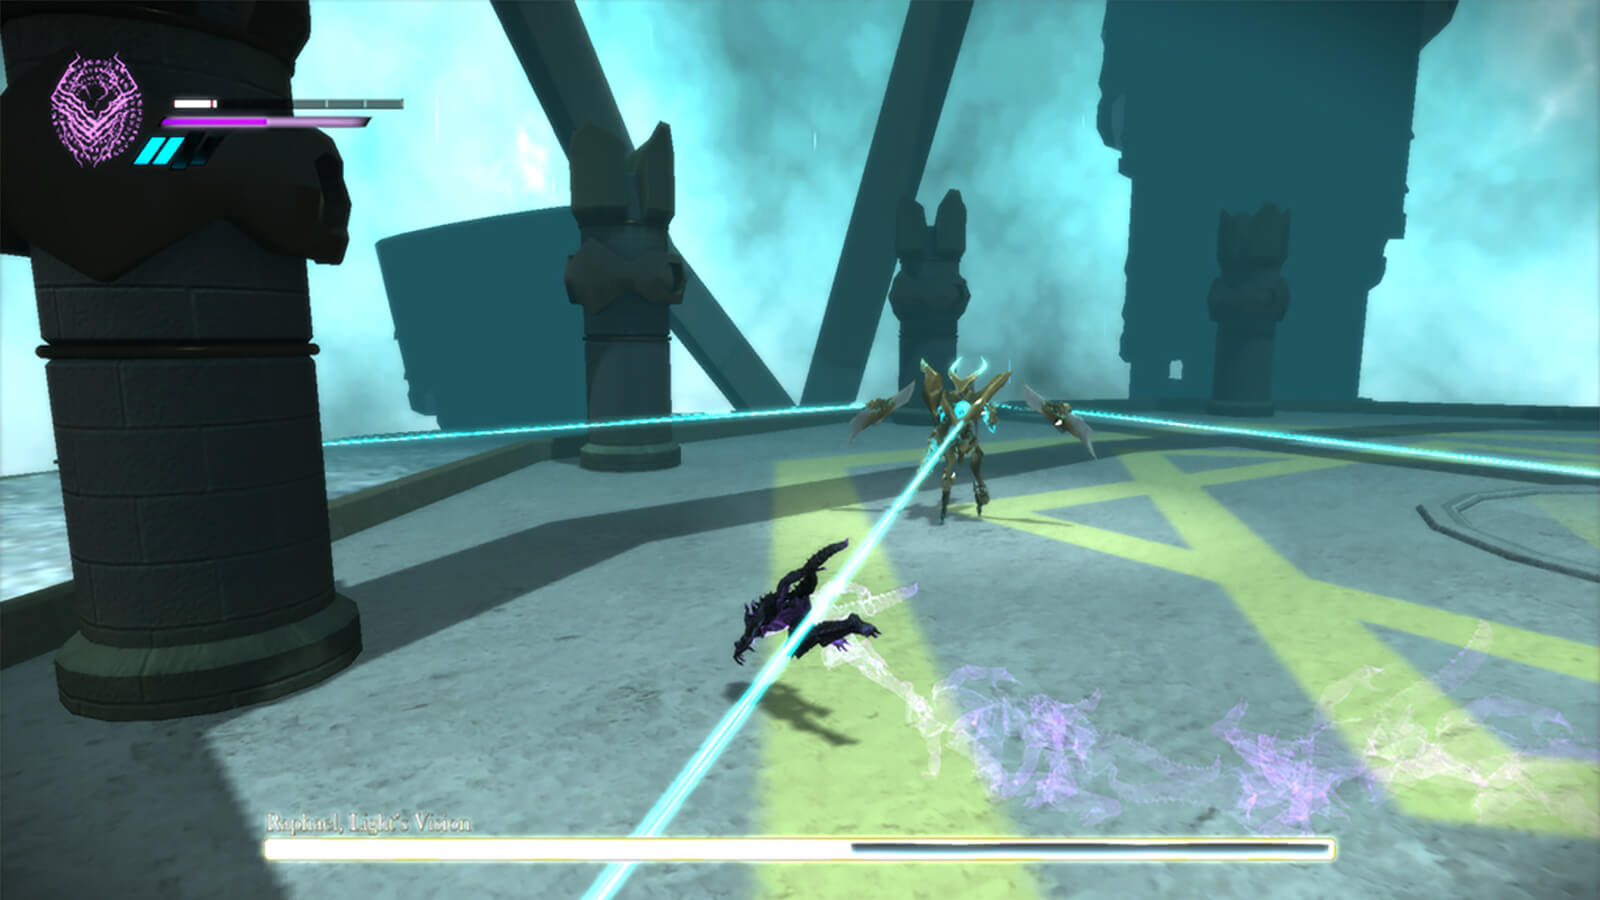 A demon-like figure in black and purple dodges blue beams coming from a large monster on a gray, polygonal parapet.